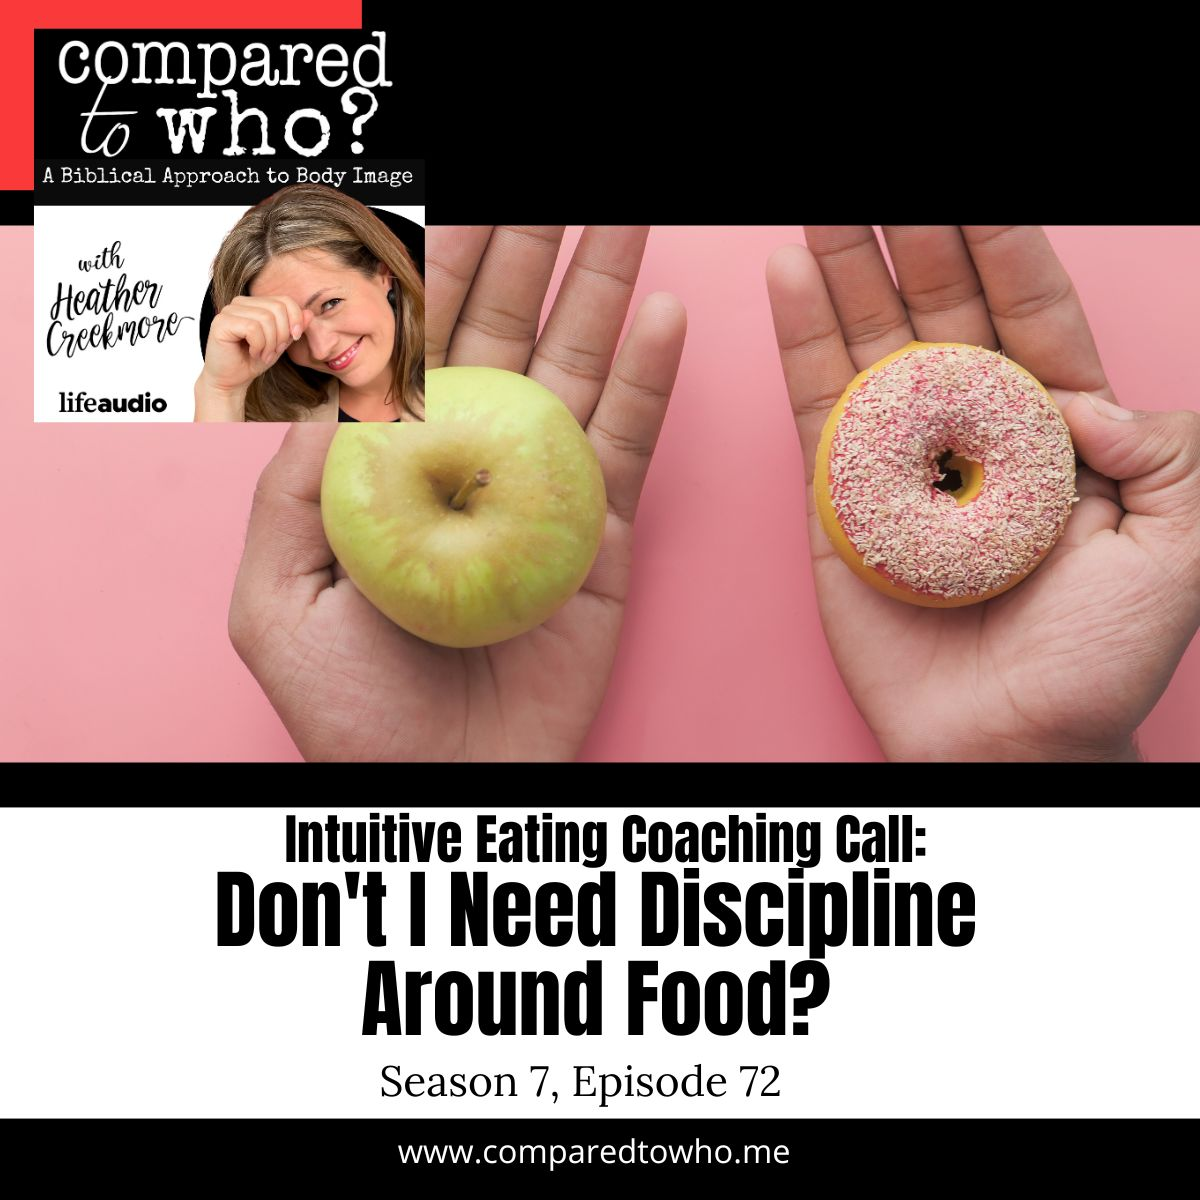 Don't I Need More Discipline Around Food? Intuitive Eating Coaching Call